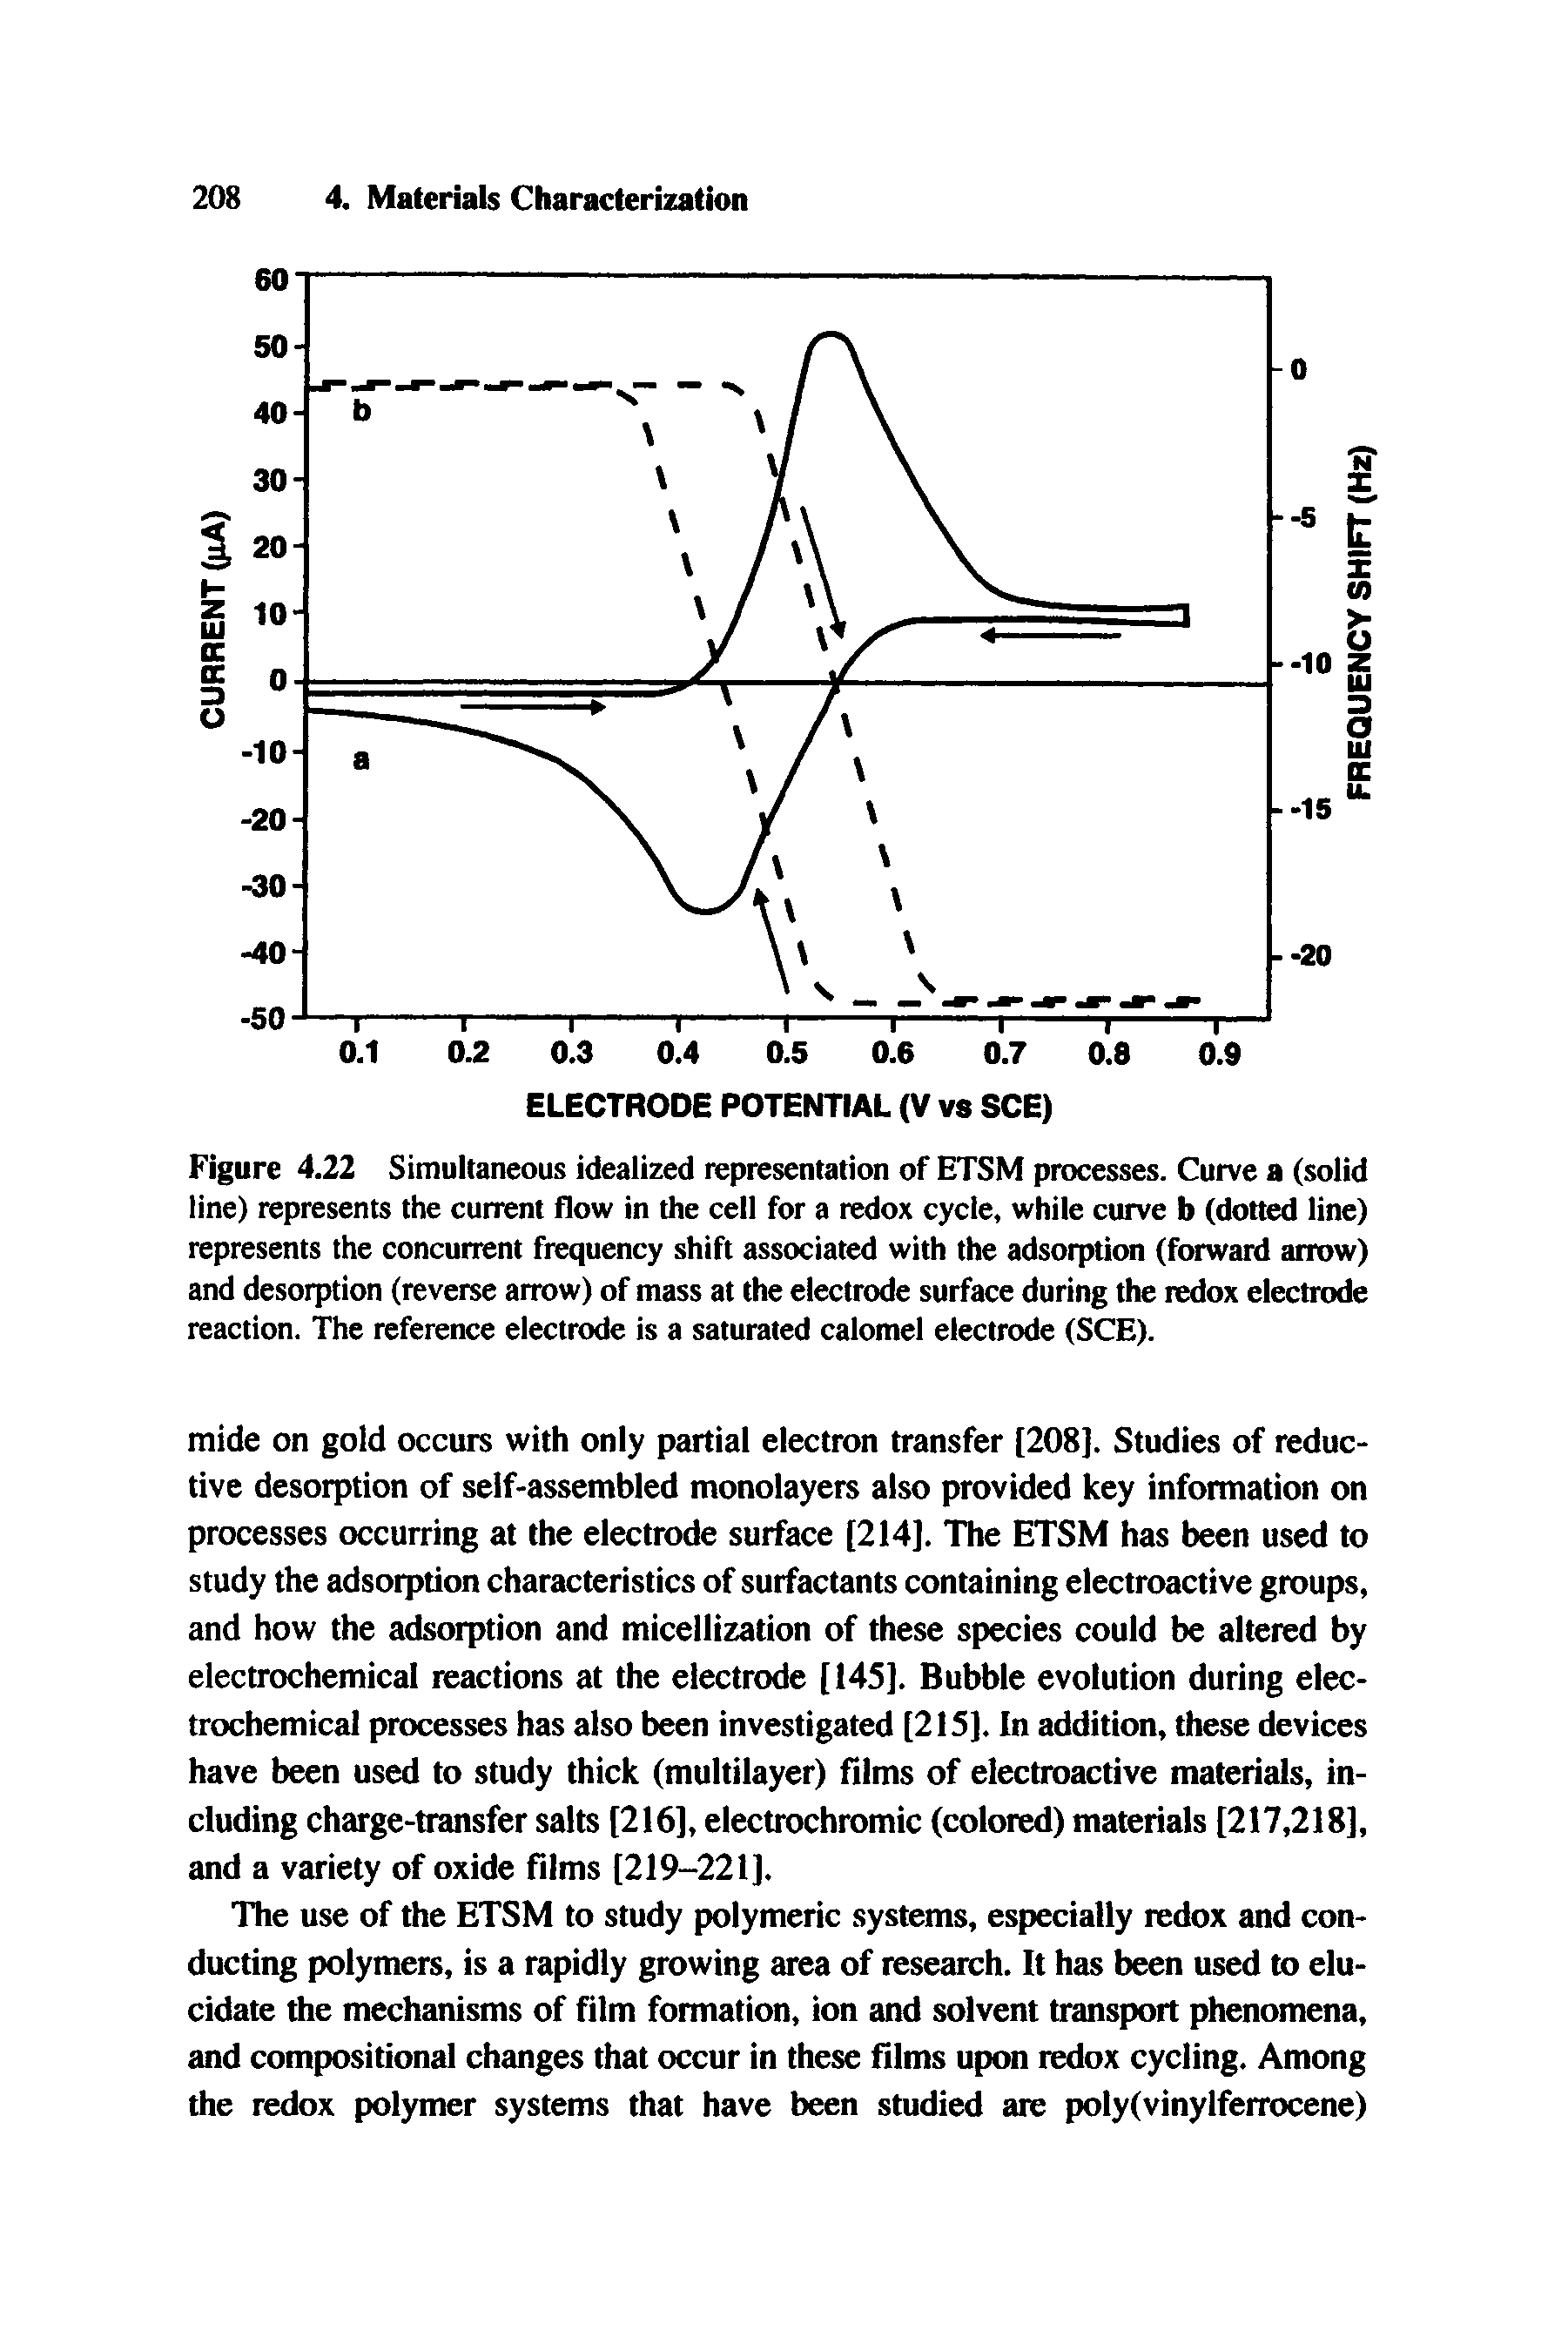 Figure 4.22 Simultaneous idealized representation of ETSM processes. Curve a (solid line) represents the current flow in the cell for a redox cycle, while curve b (dotted line) represents the concurrent frequency shift associated with the adsorption (fwward arrow) and desorption (reverse arrow) of mass at the electrode surface during the redox electrode reaction. The reference electrode is a saturated calomel electrode (SCE).